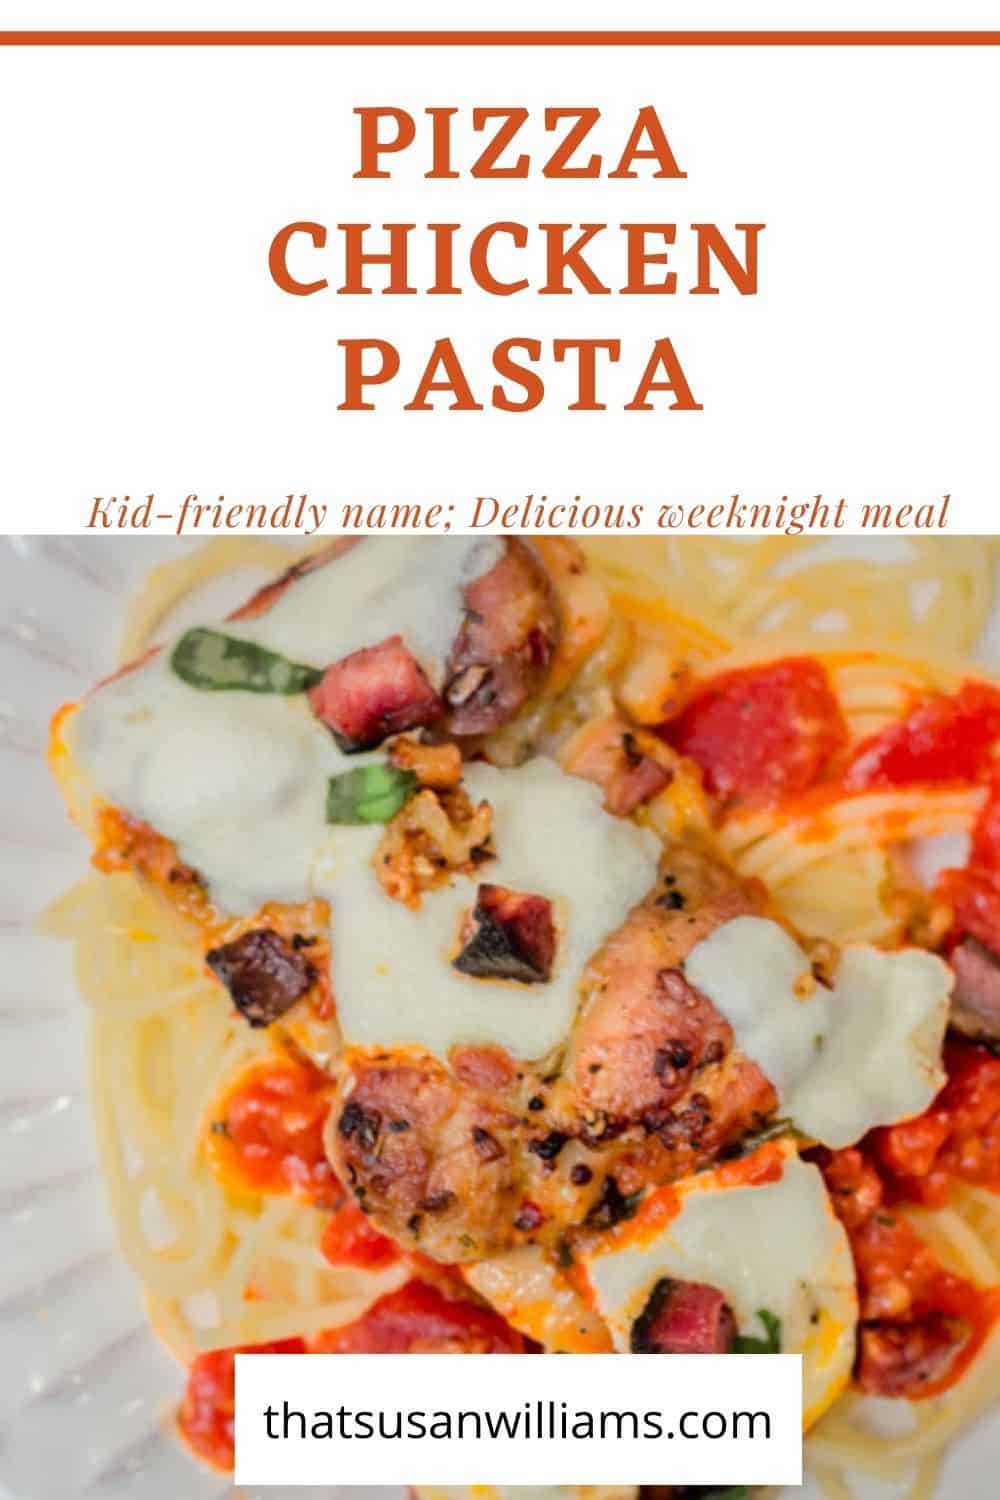 Pizza Chicken Pasta is a weeknight recipe with a kid-friendly name, that is delicious enough for adults.